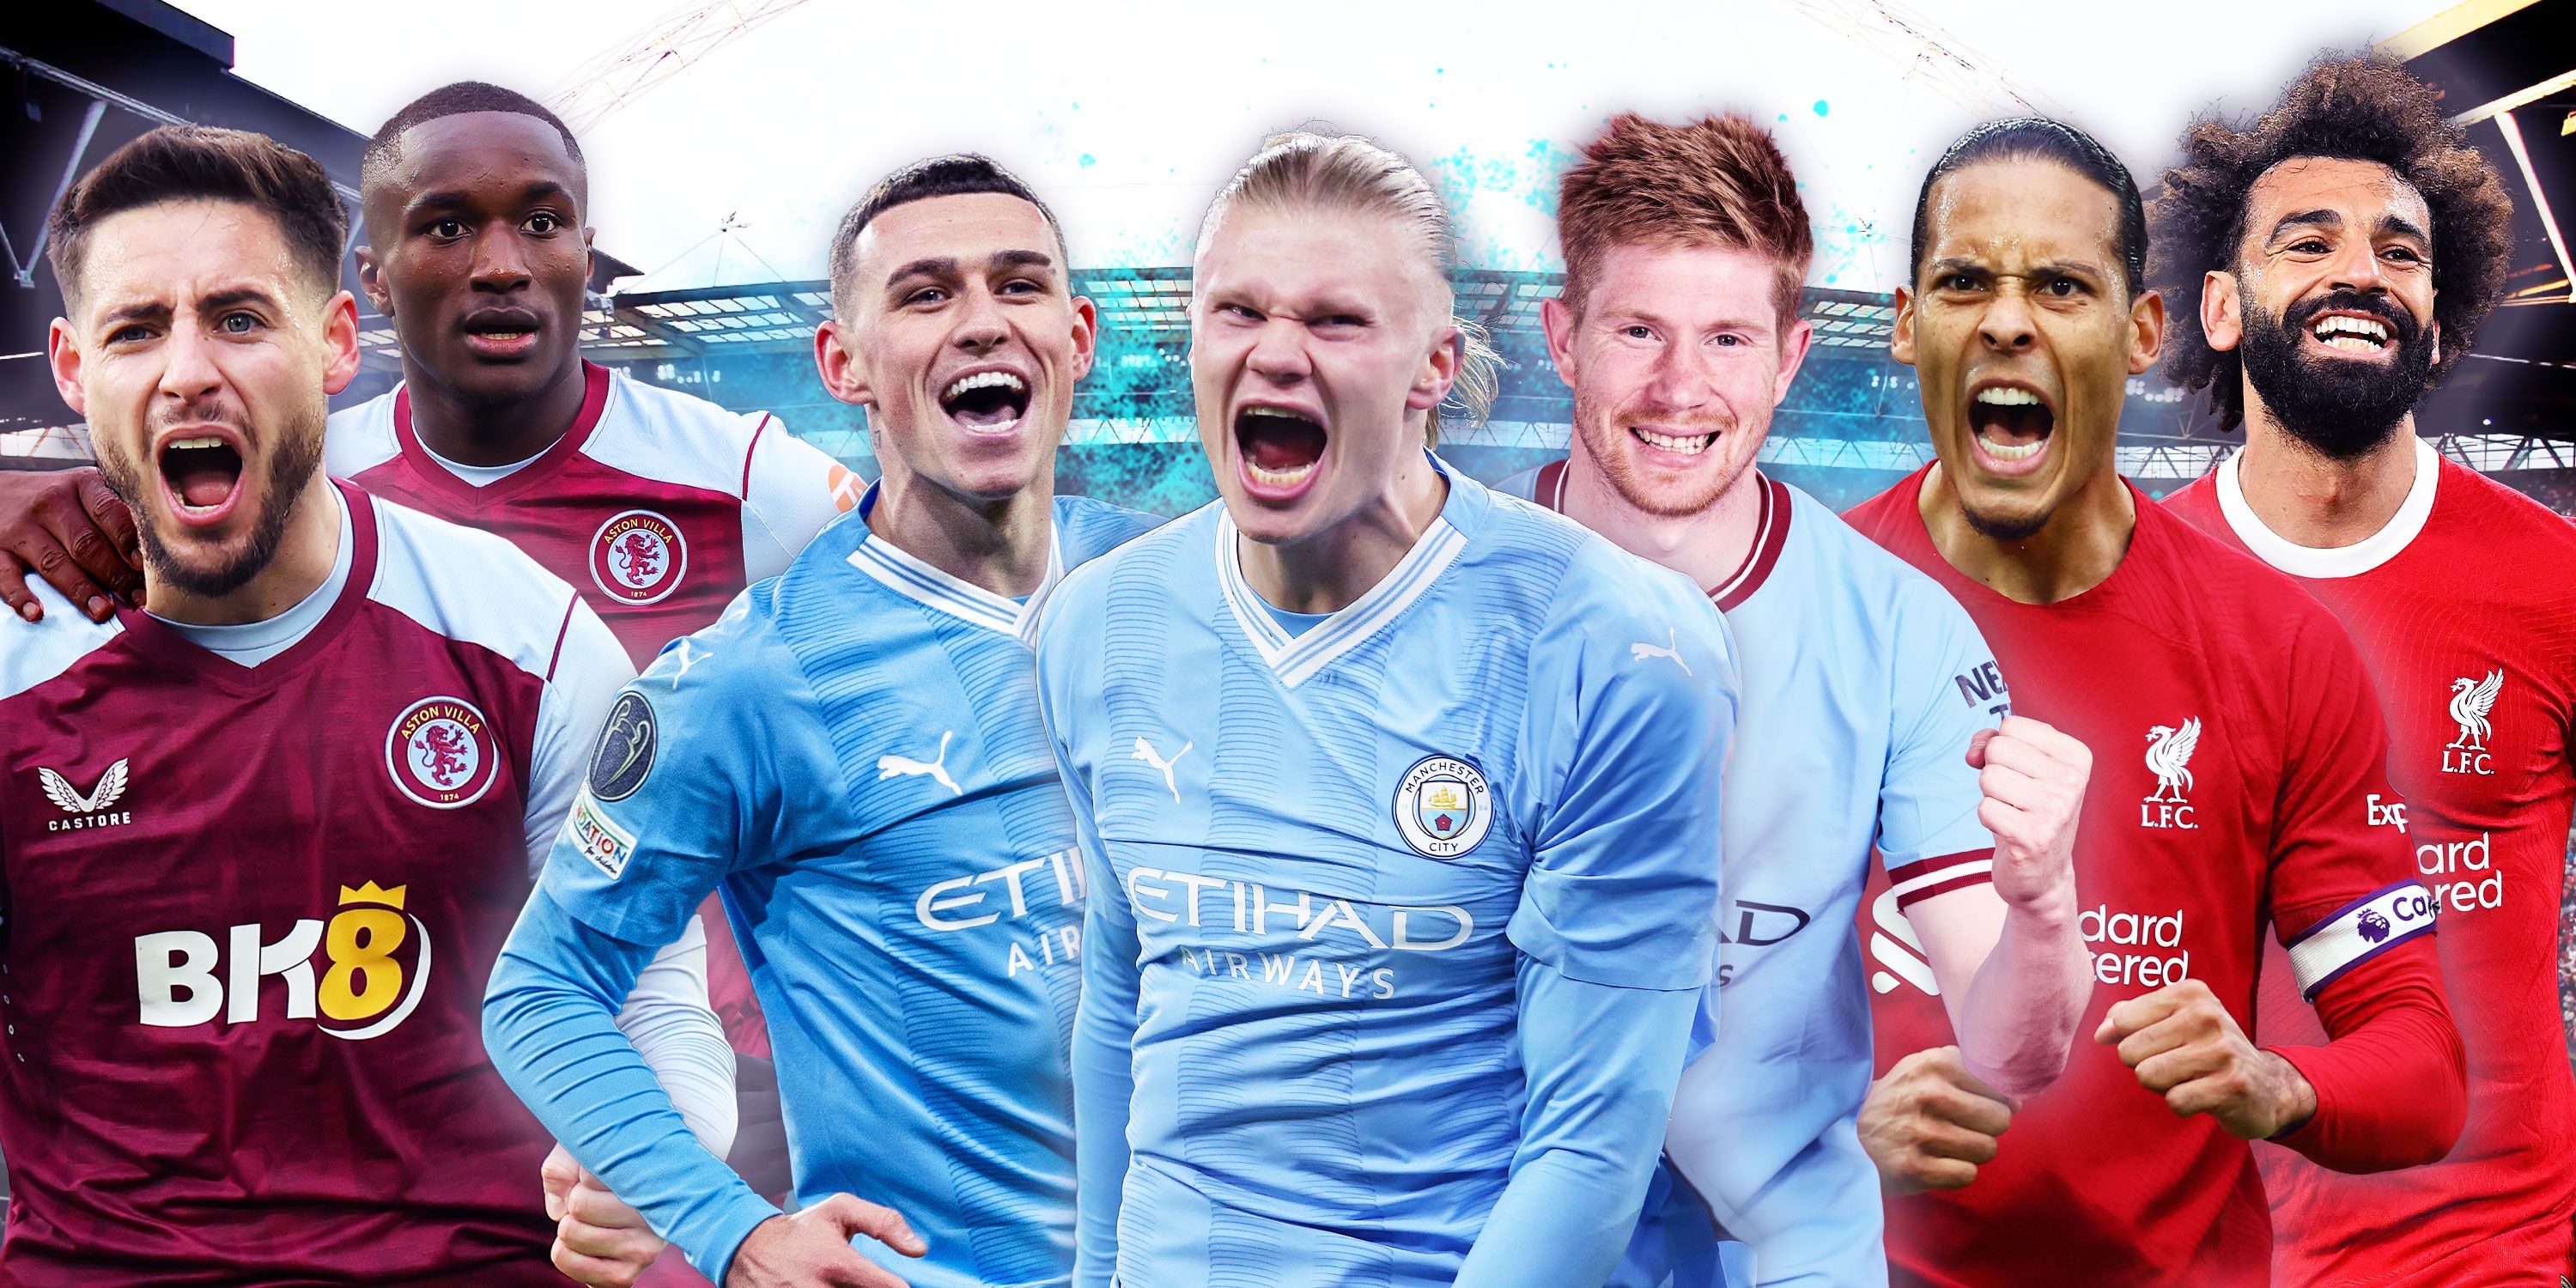 Collage featuring Aston Villa, Manchester City and Liverpool players with Wembley Stadium behind.